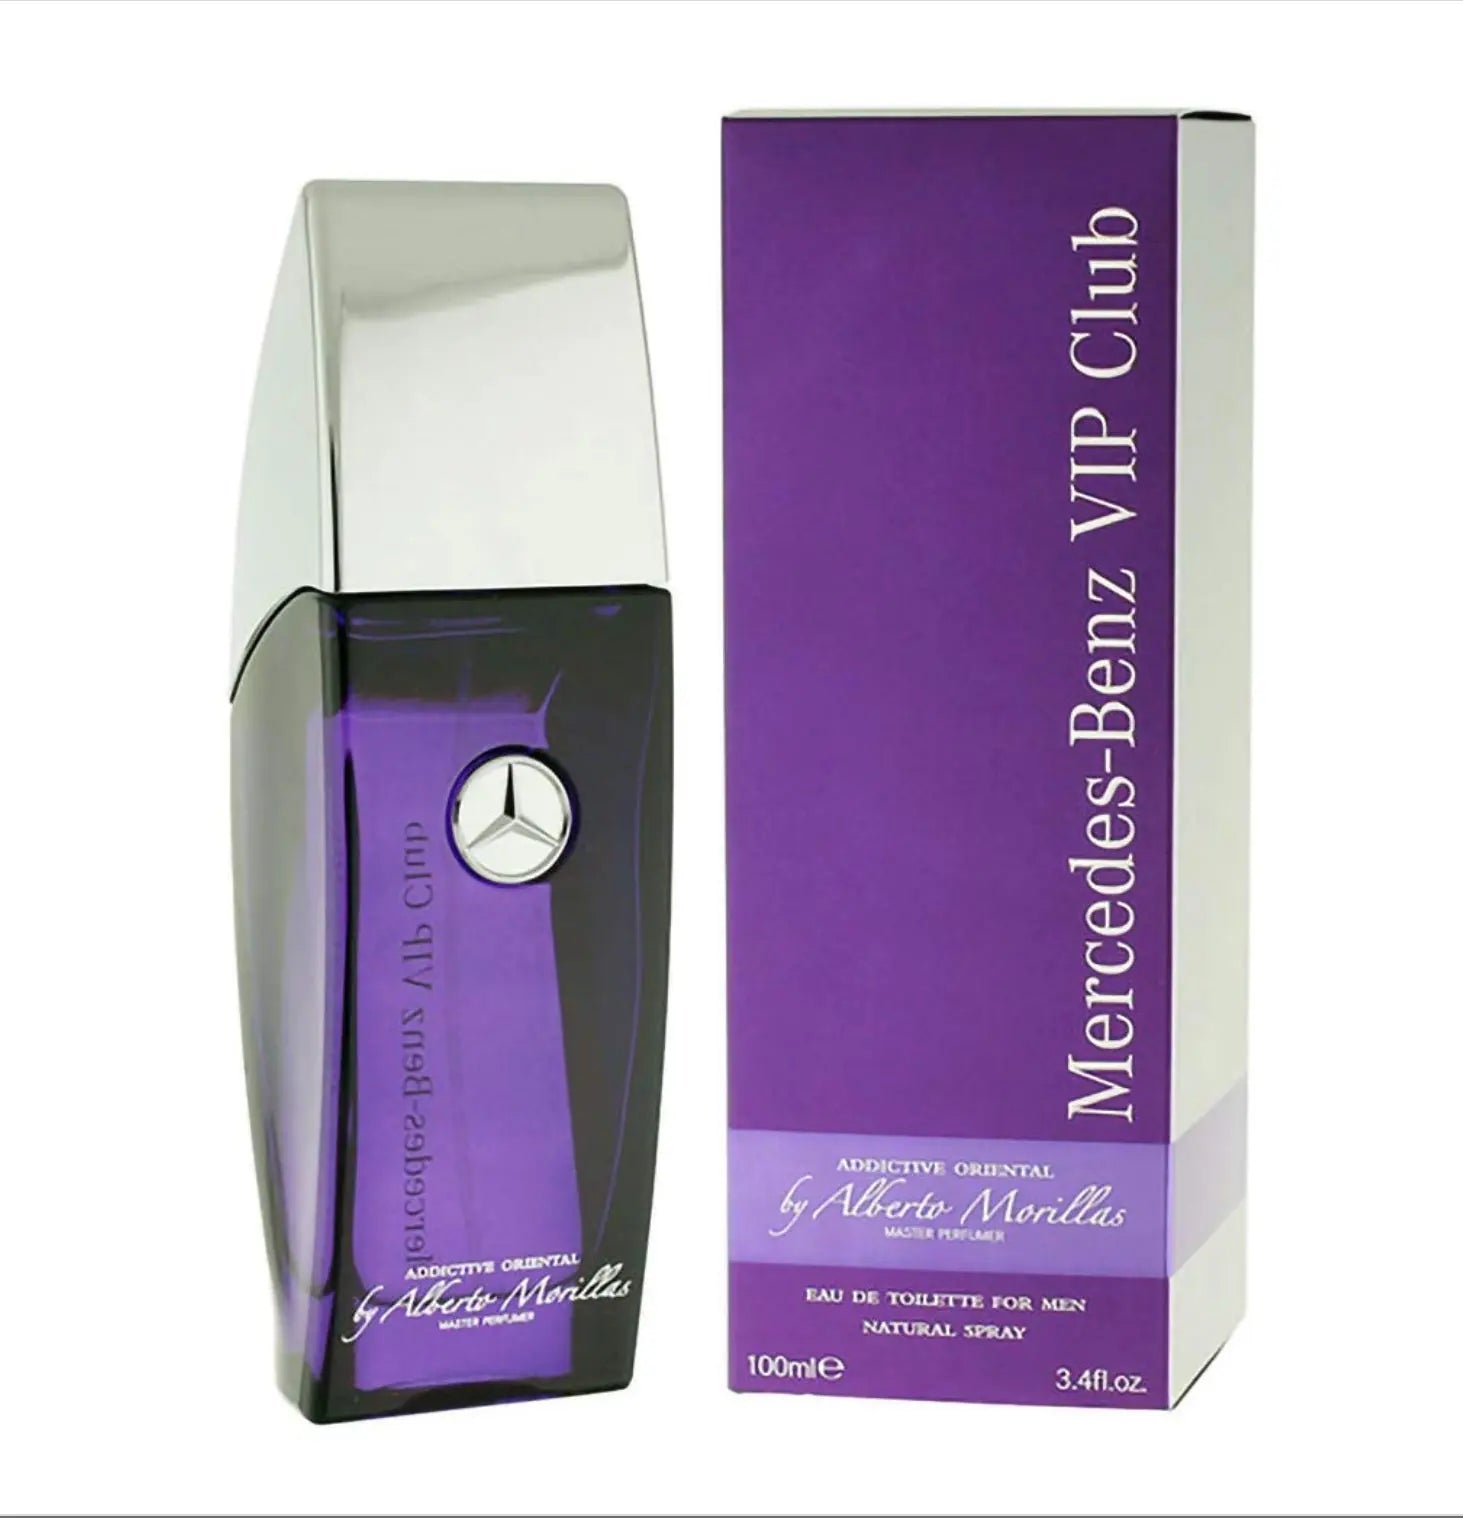 Mercedes-Benz VIP Club - Addictive Oriental EDT 100ml For Men Imported Perfumes & Beauty Store